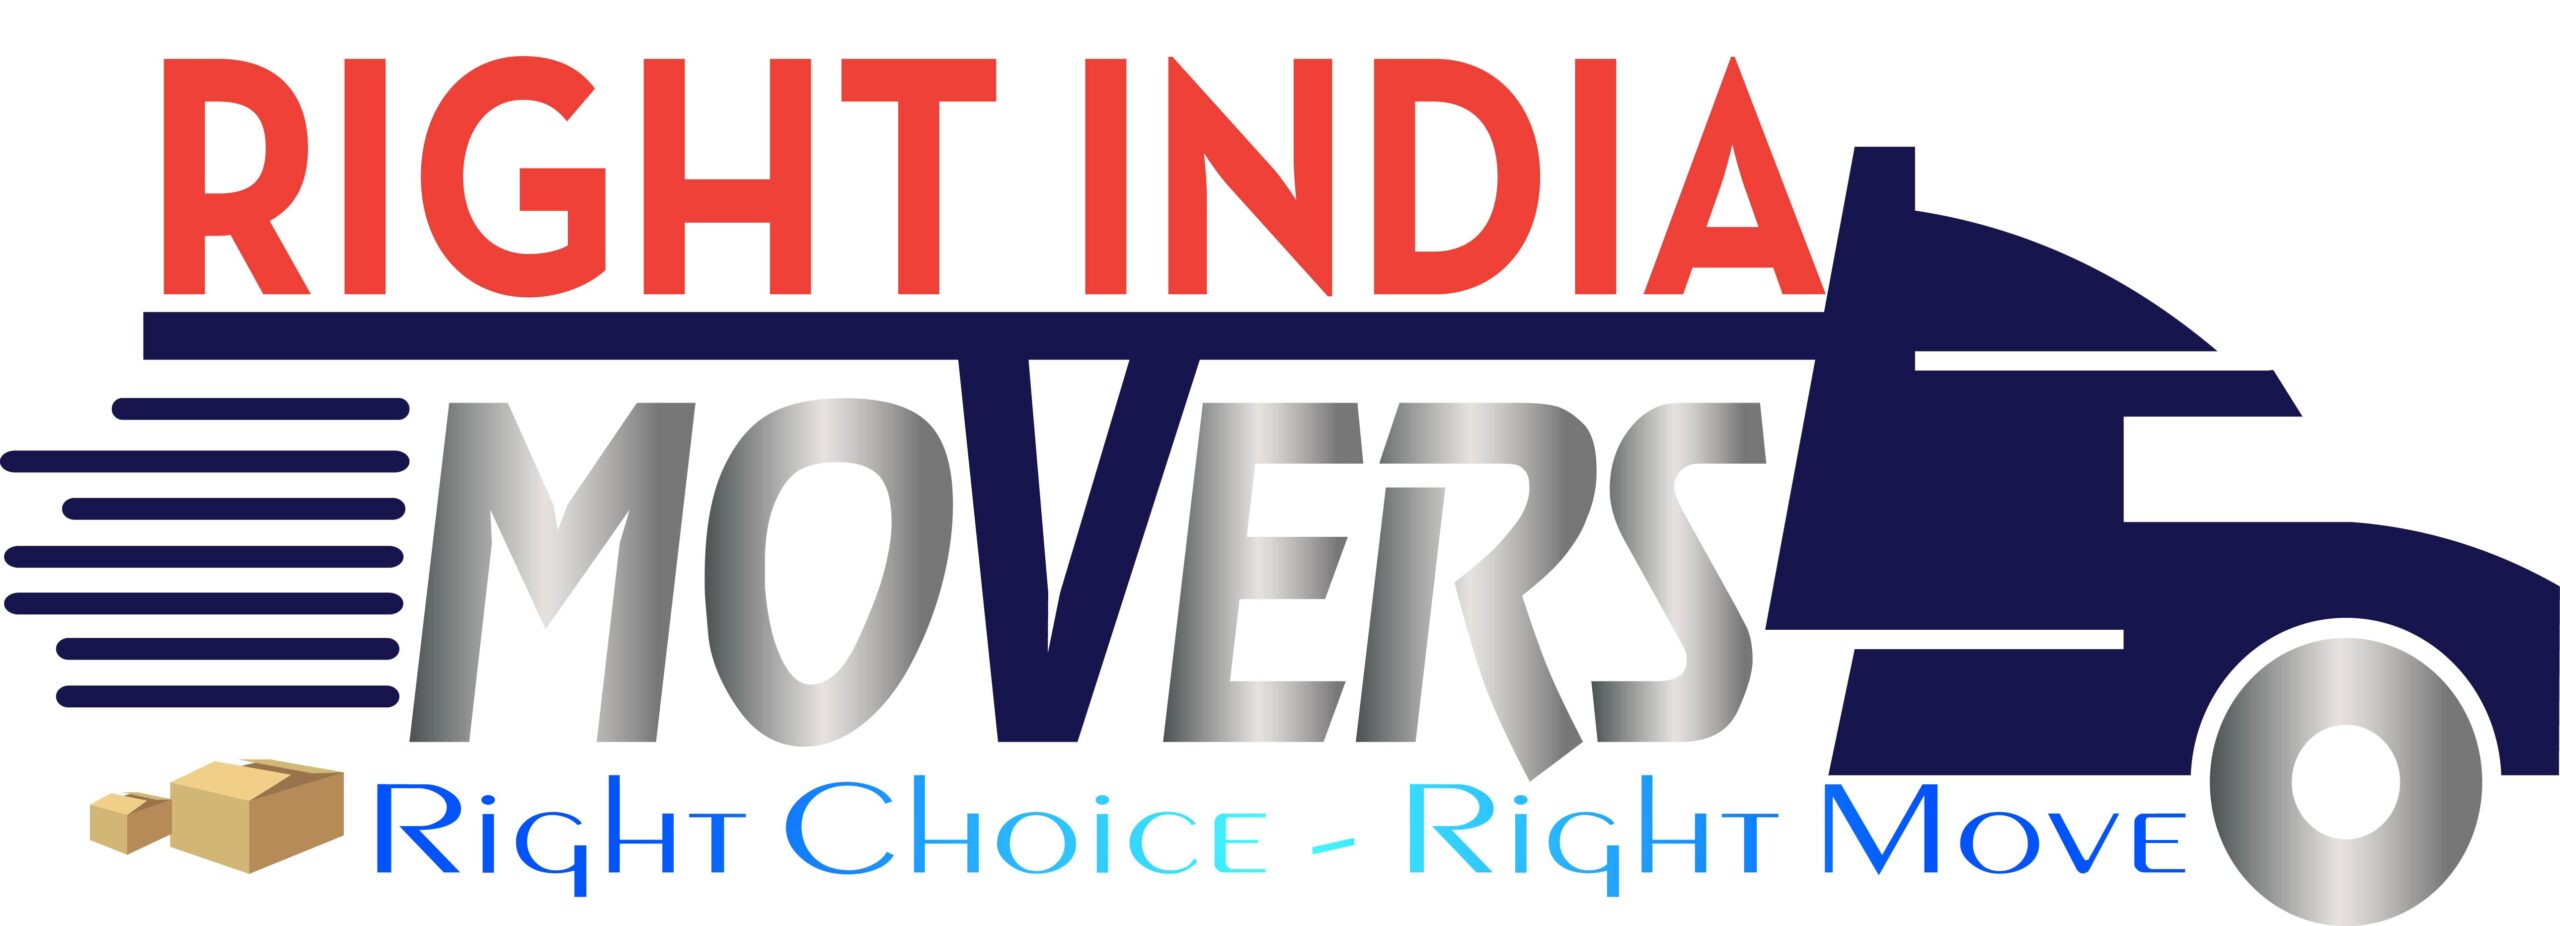 right india movers